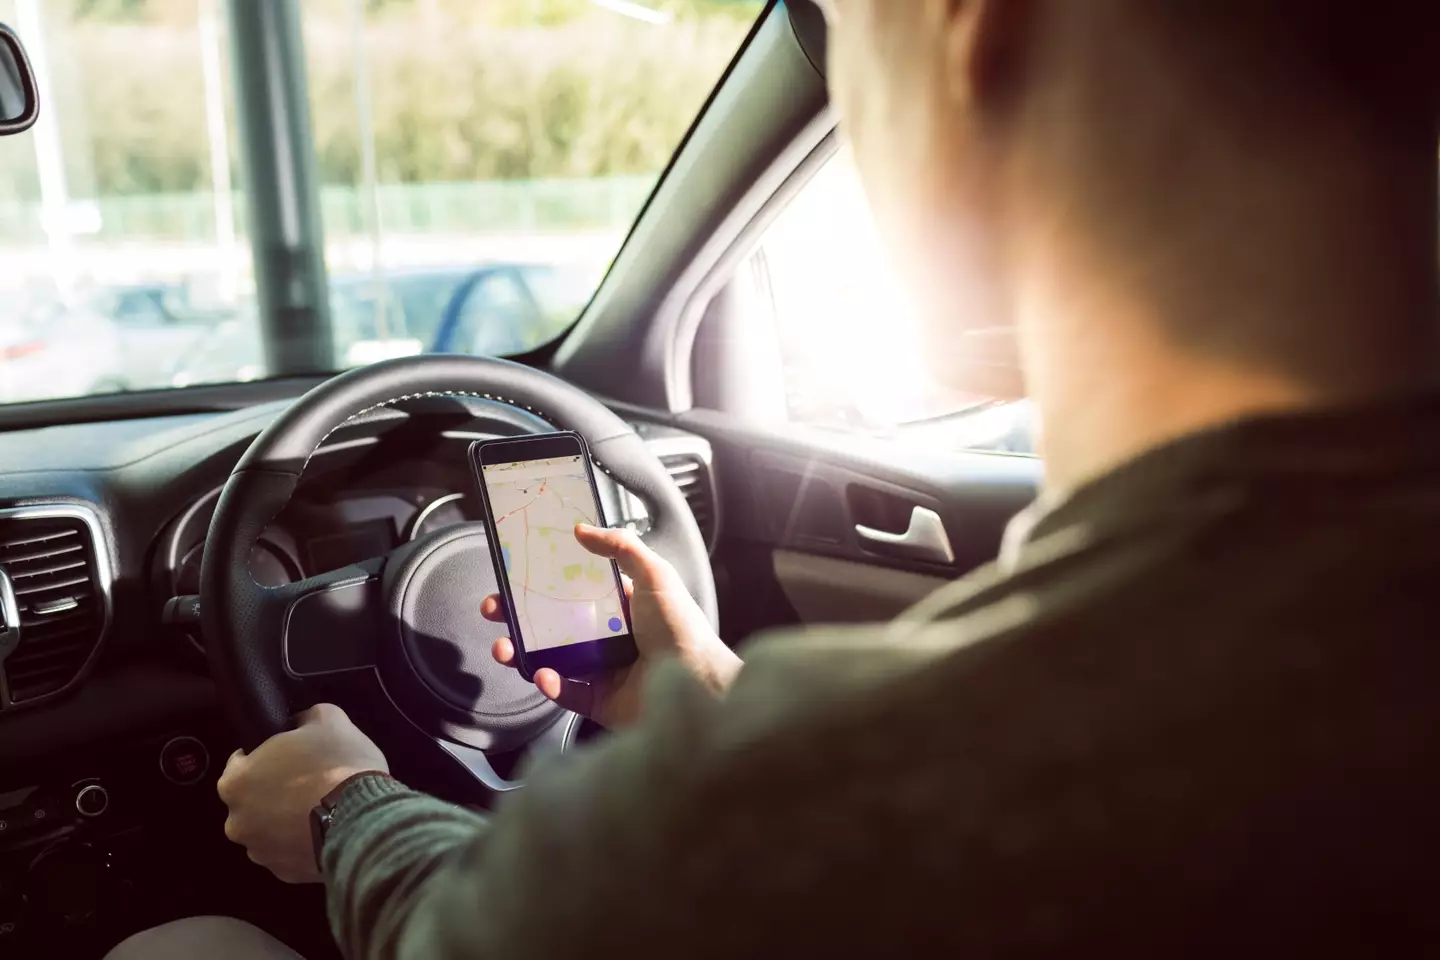 You shouldn't be on your phone in the car, but that's harder to do when it's screaming at you.